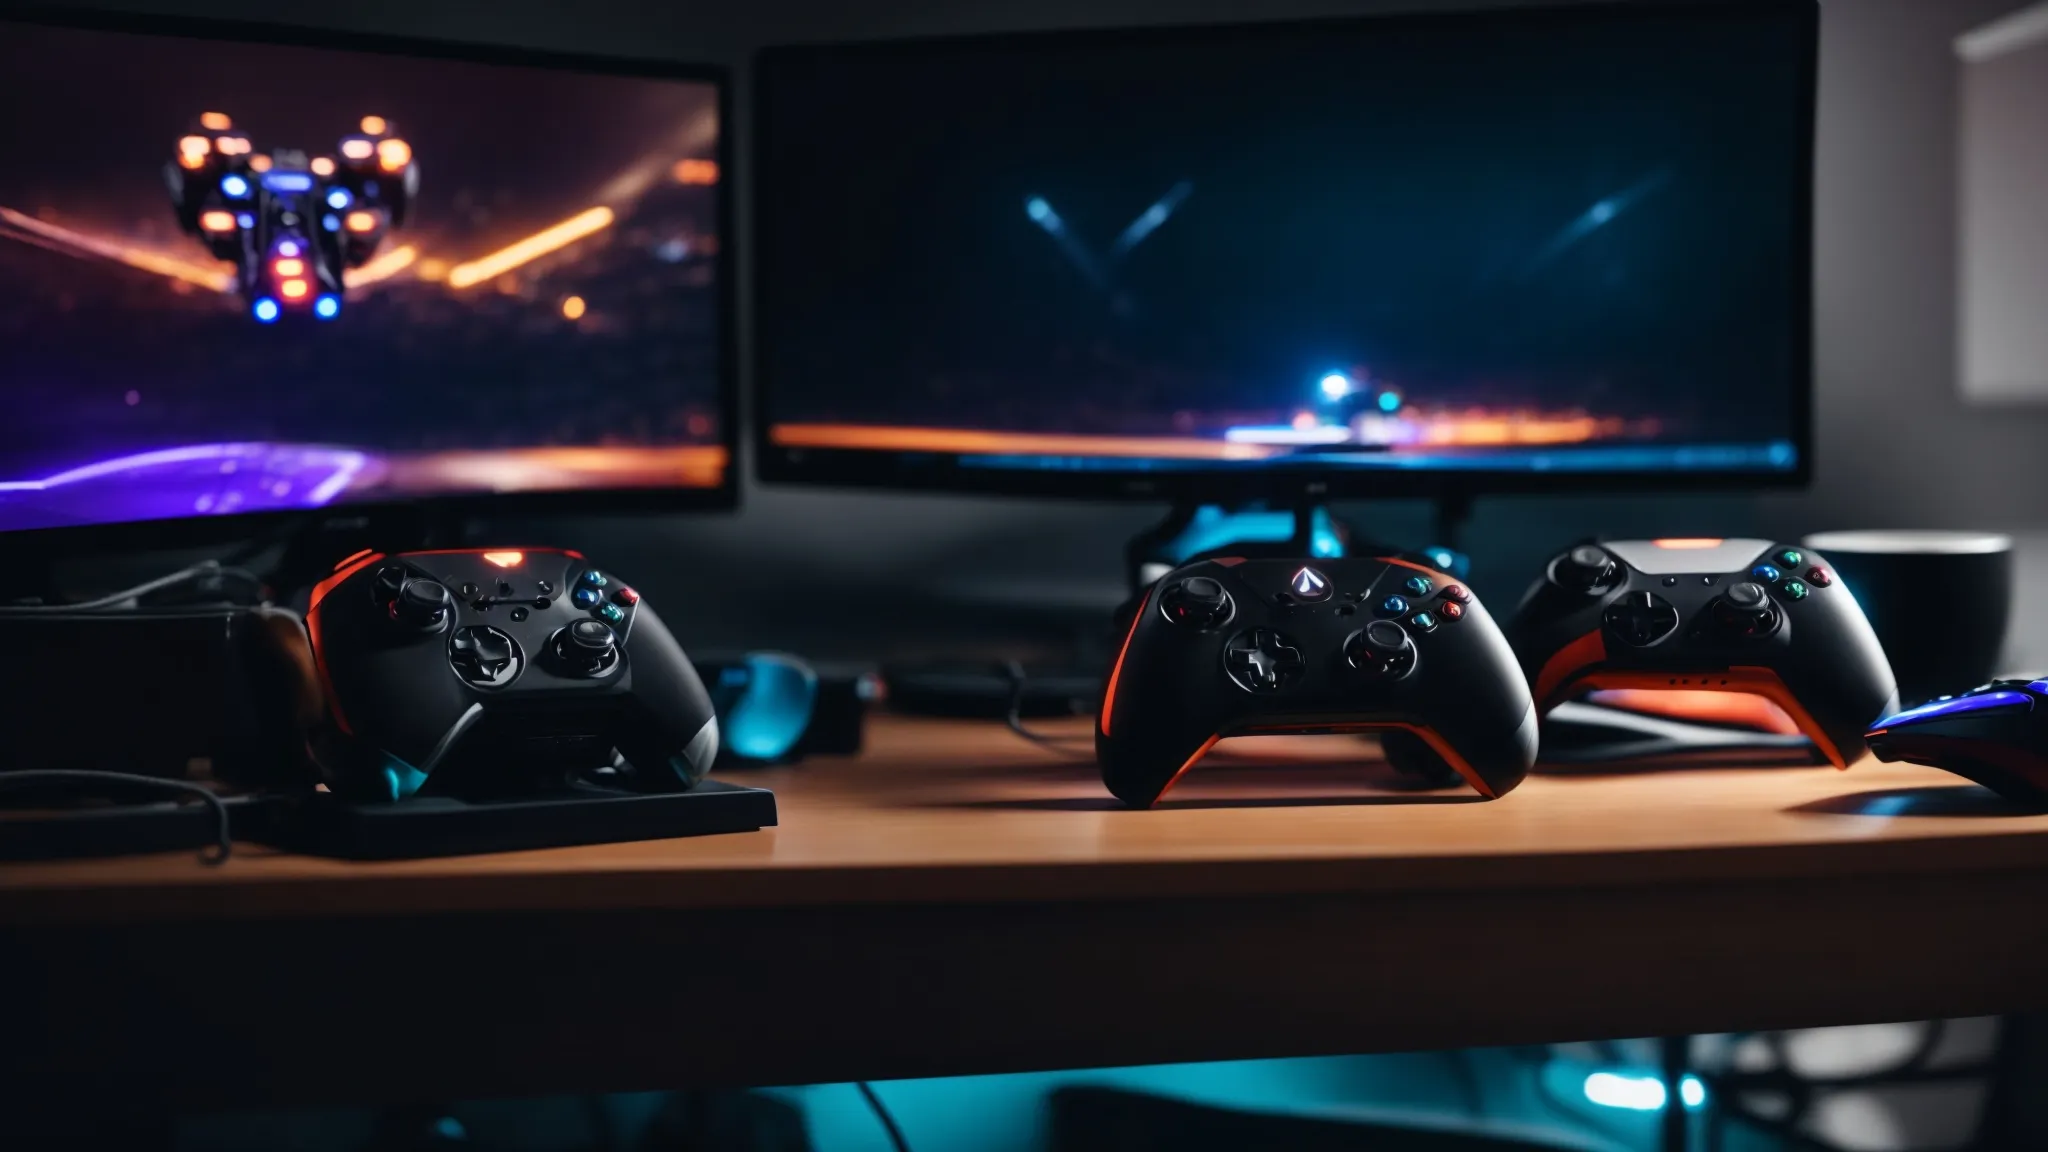 four different gaming controllers rest atop a sleek, modern desk, each bathed in the soft glow of a computer screen displaying an intense match of rocket league.